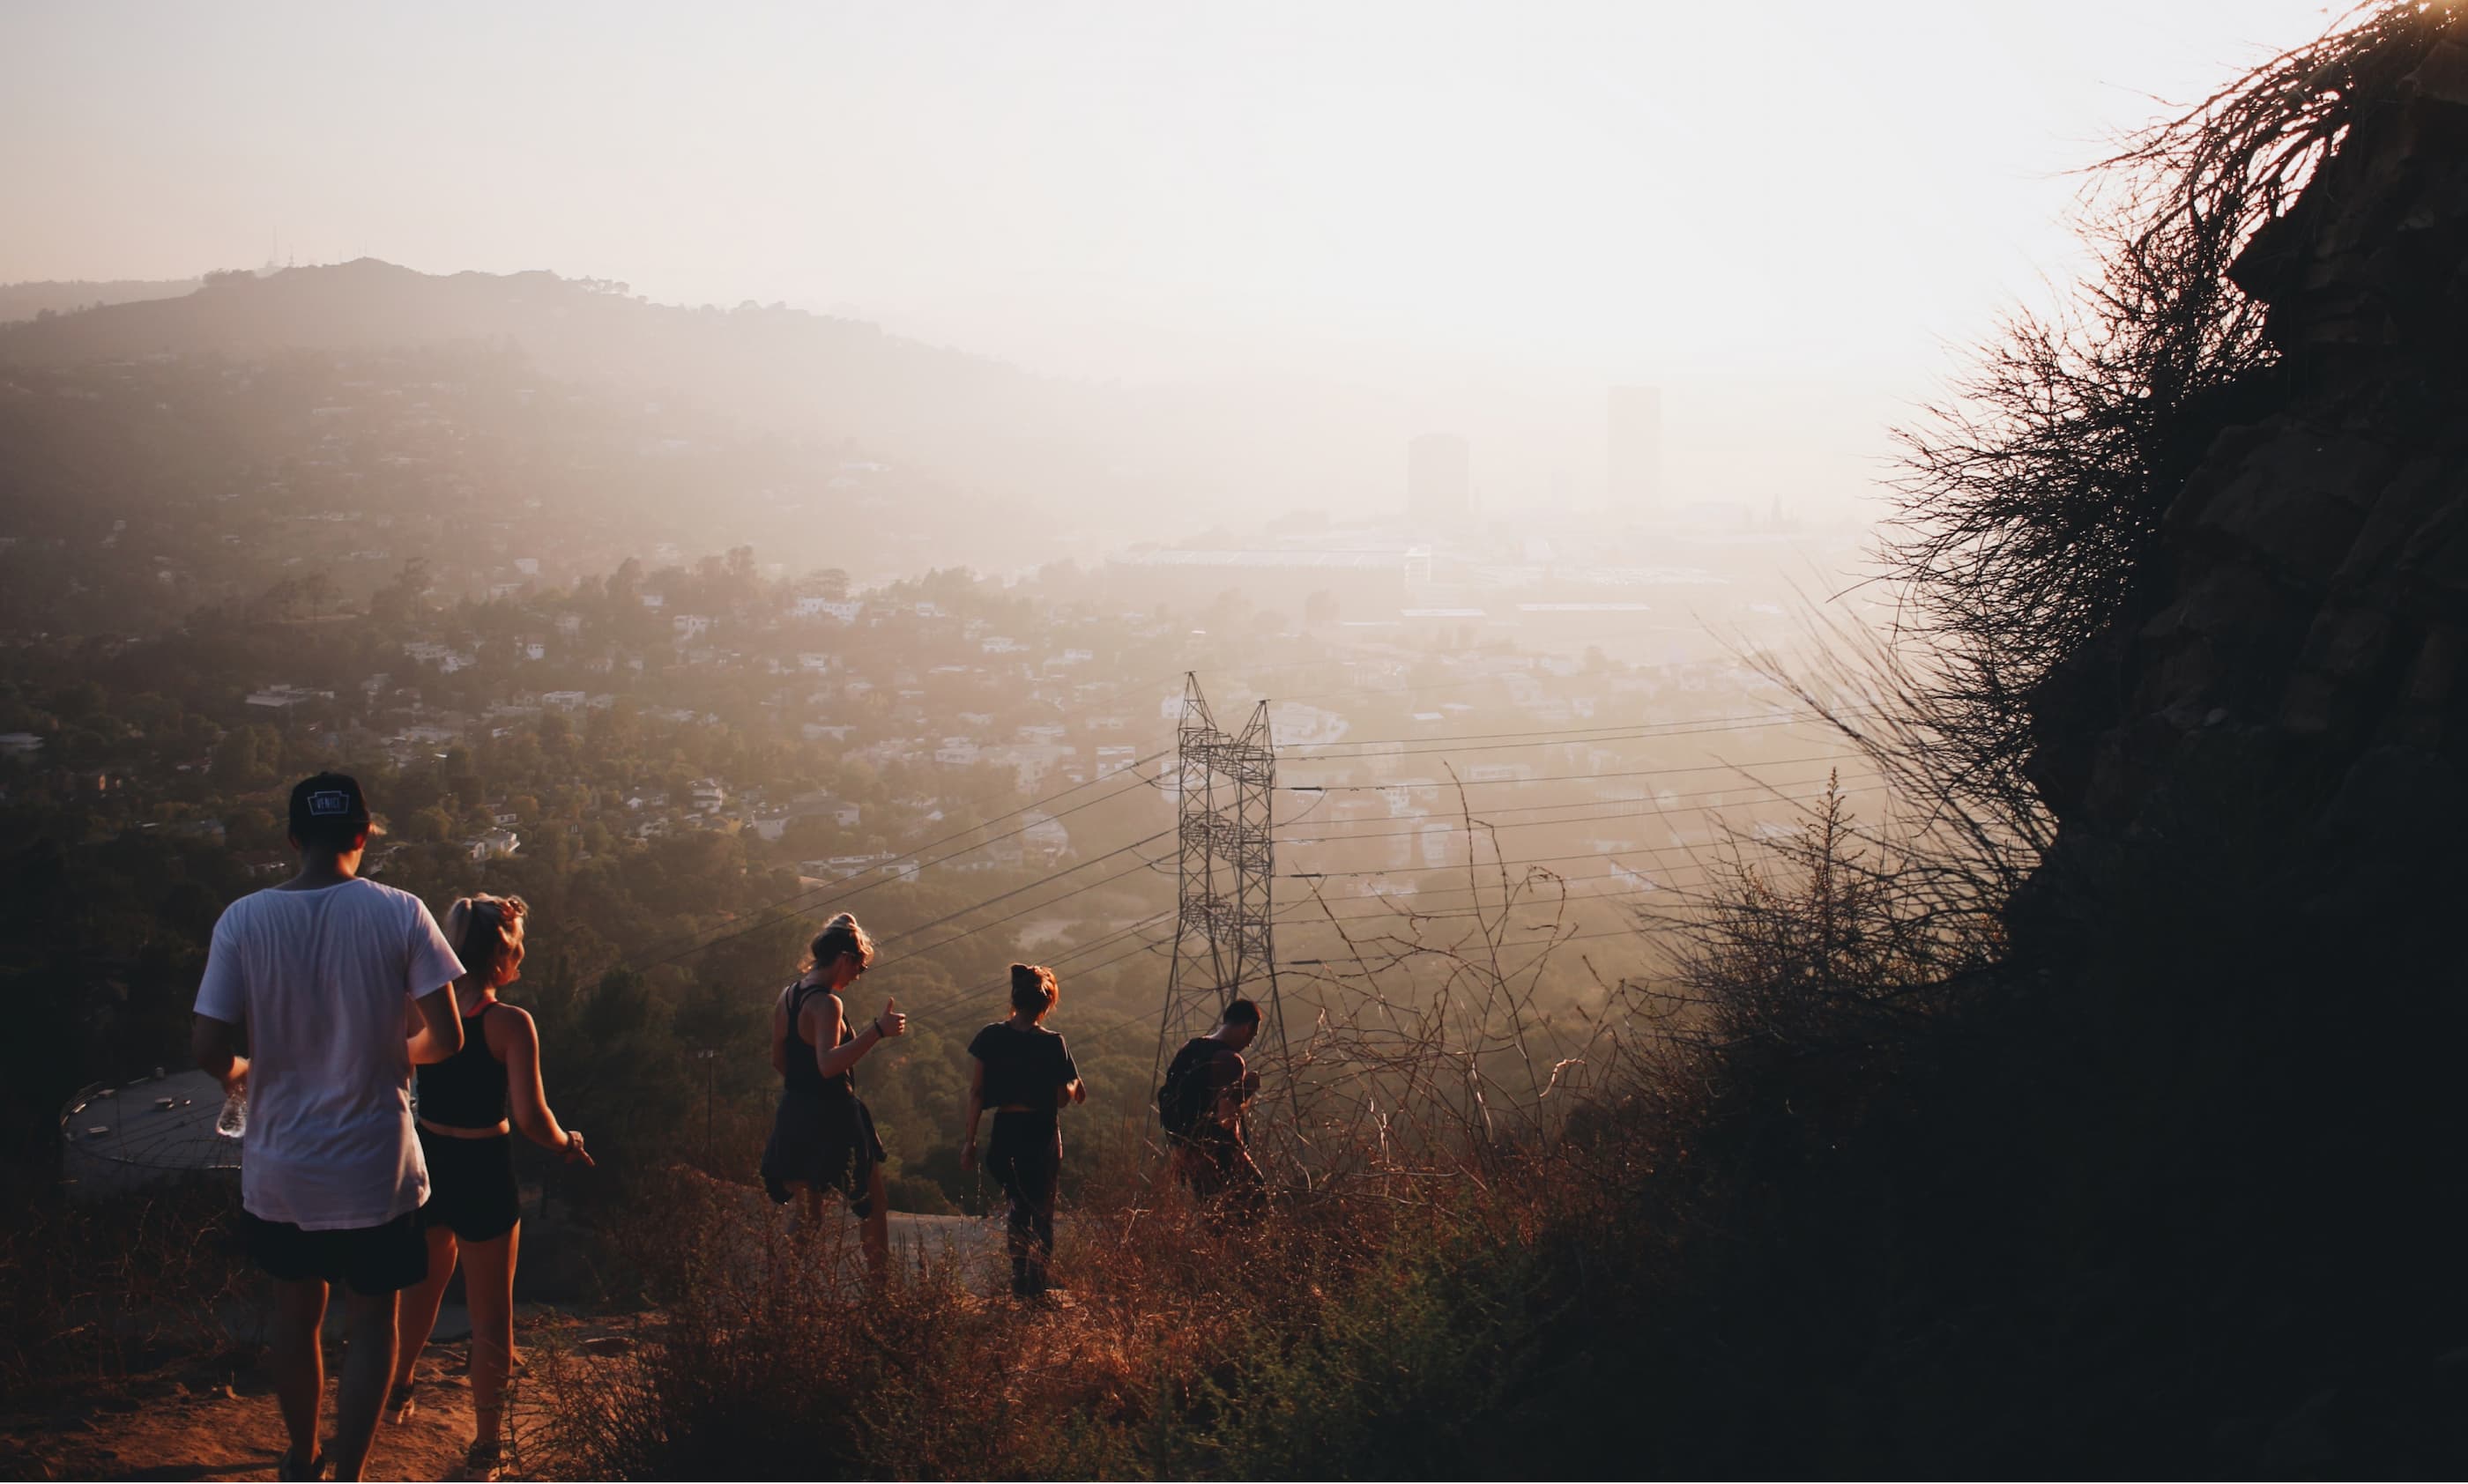 A group of people hiking down a hill